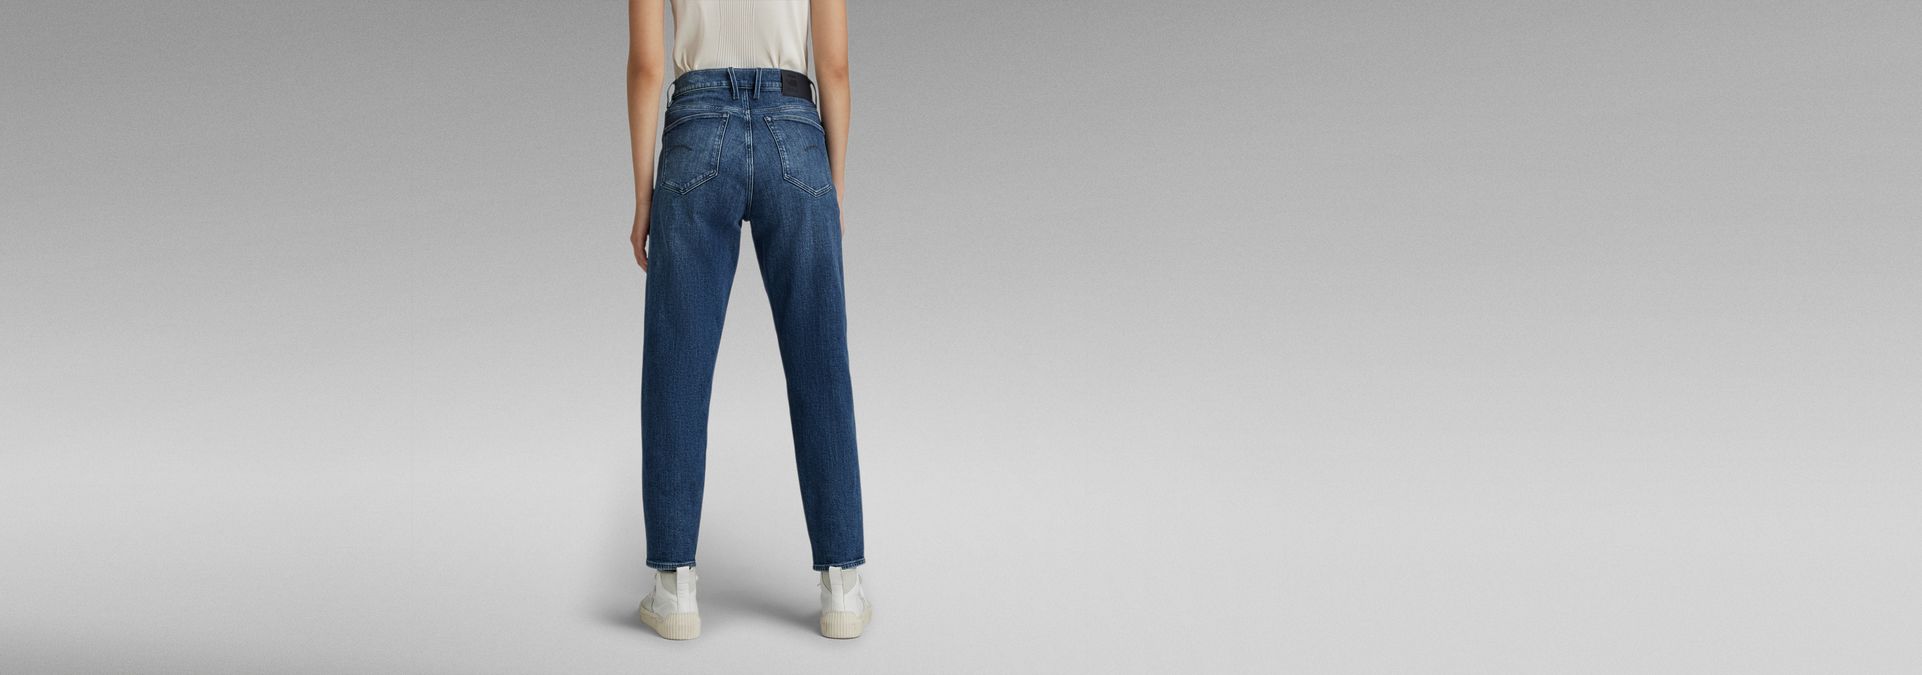 G-Star RAW Denim Janeh Ultra High Waist Mom Ankle Jeans in Blue Womens Clothing Jeans Straight-leg jeans Save 71% 